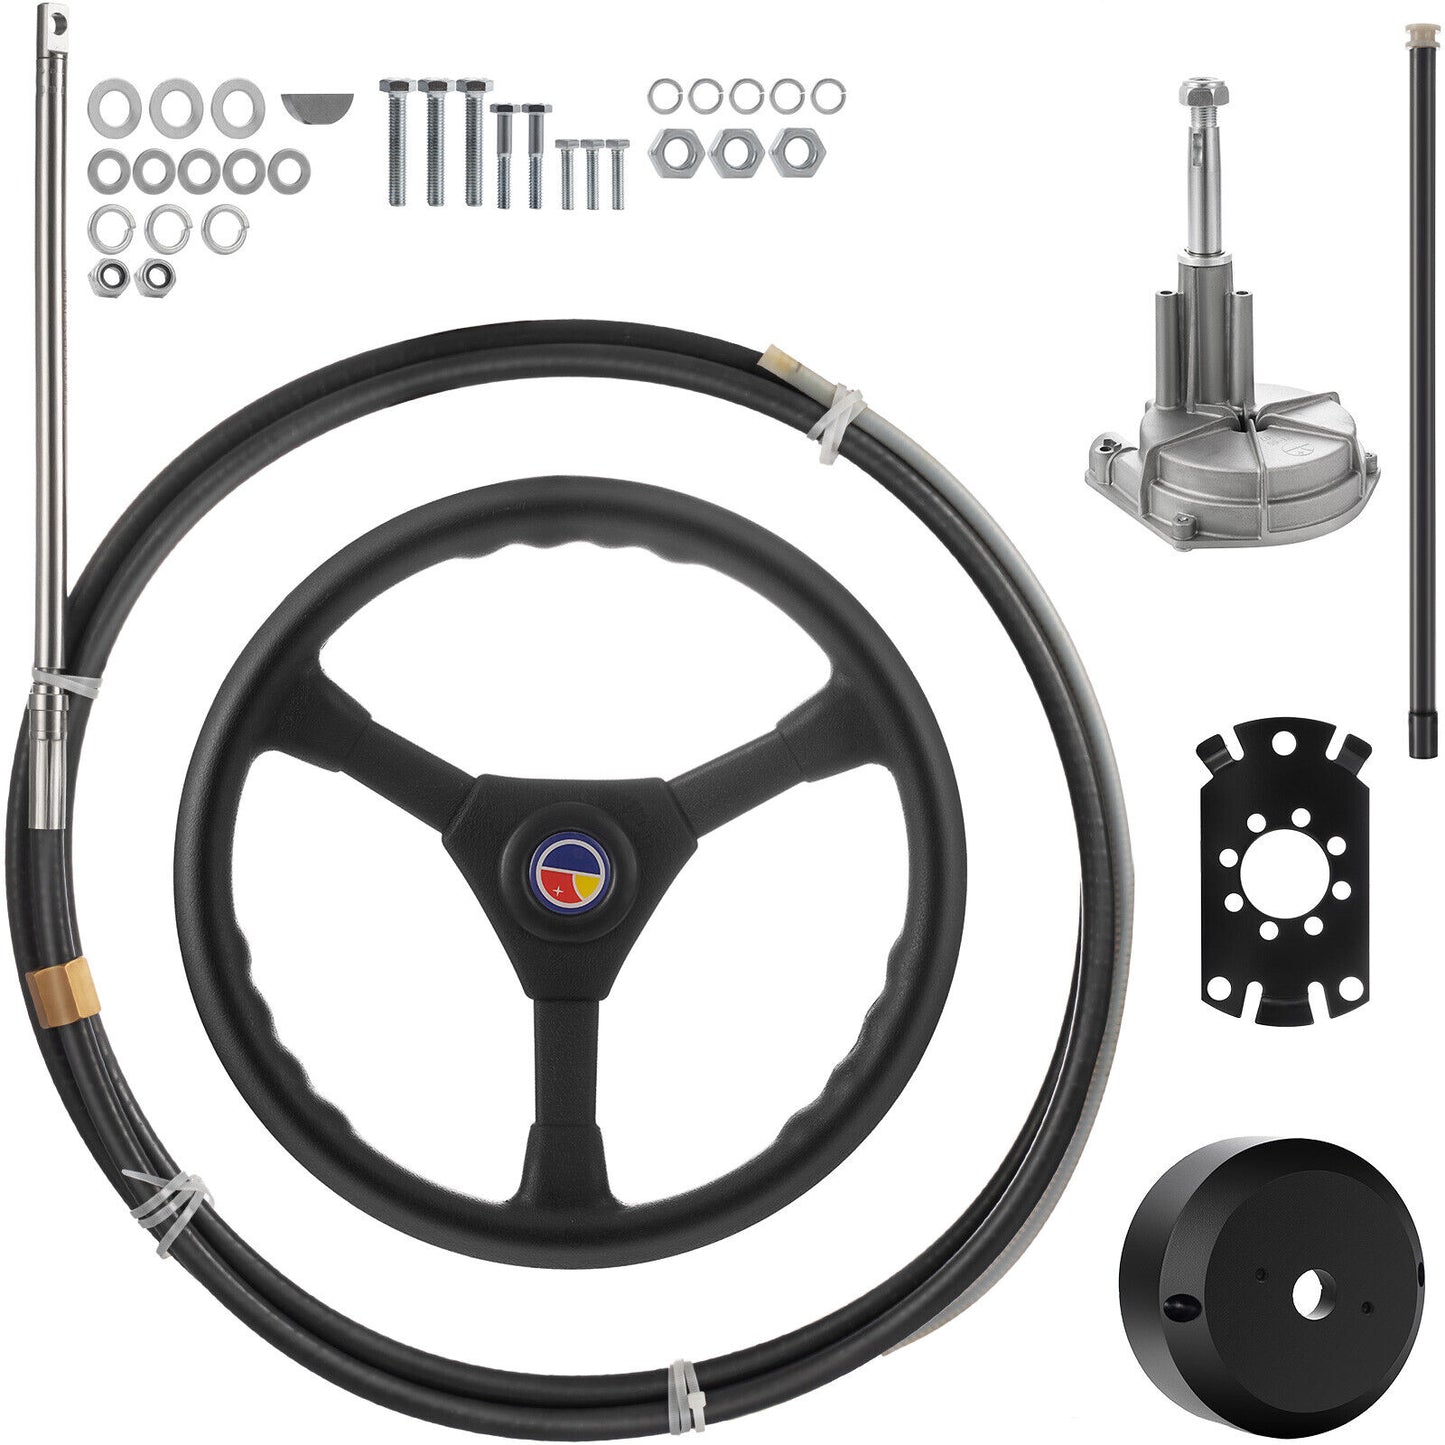 14 Feet Boat Rotary Steering System Outboard Kit SS13714 Marine With 13.5" Wheel